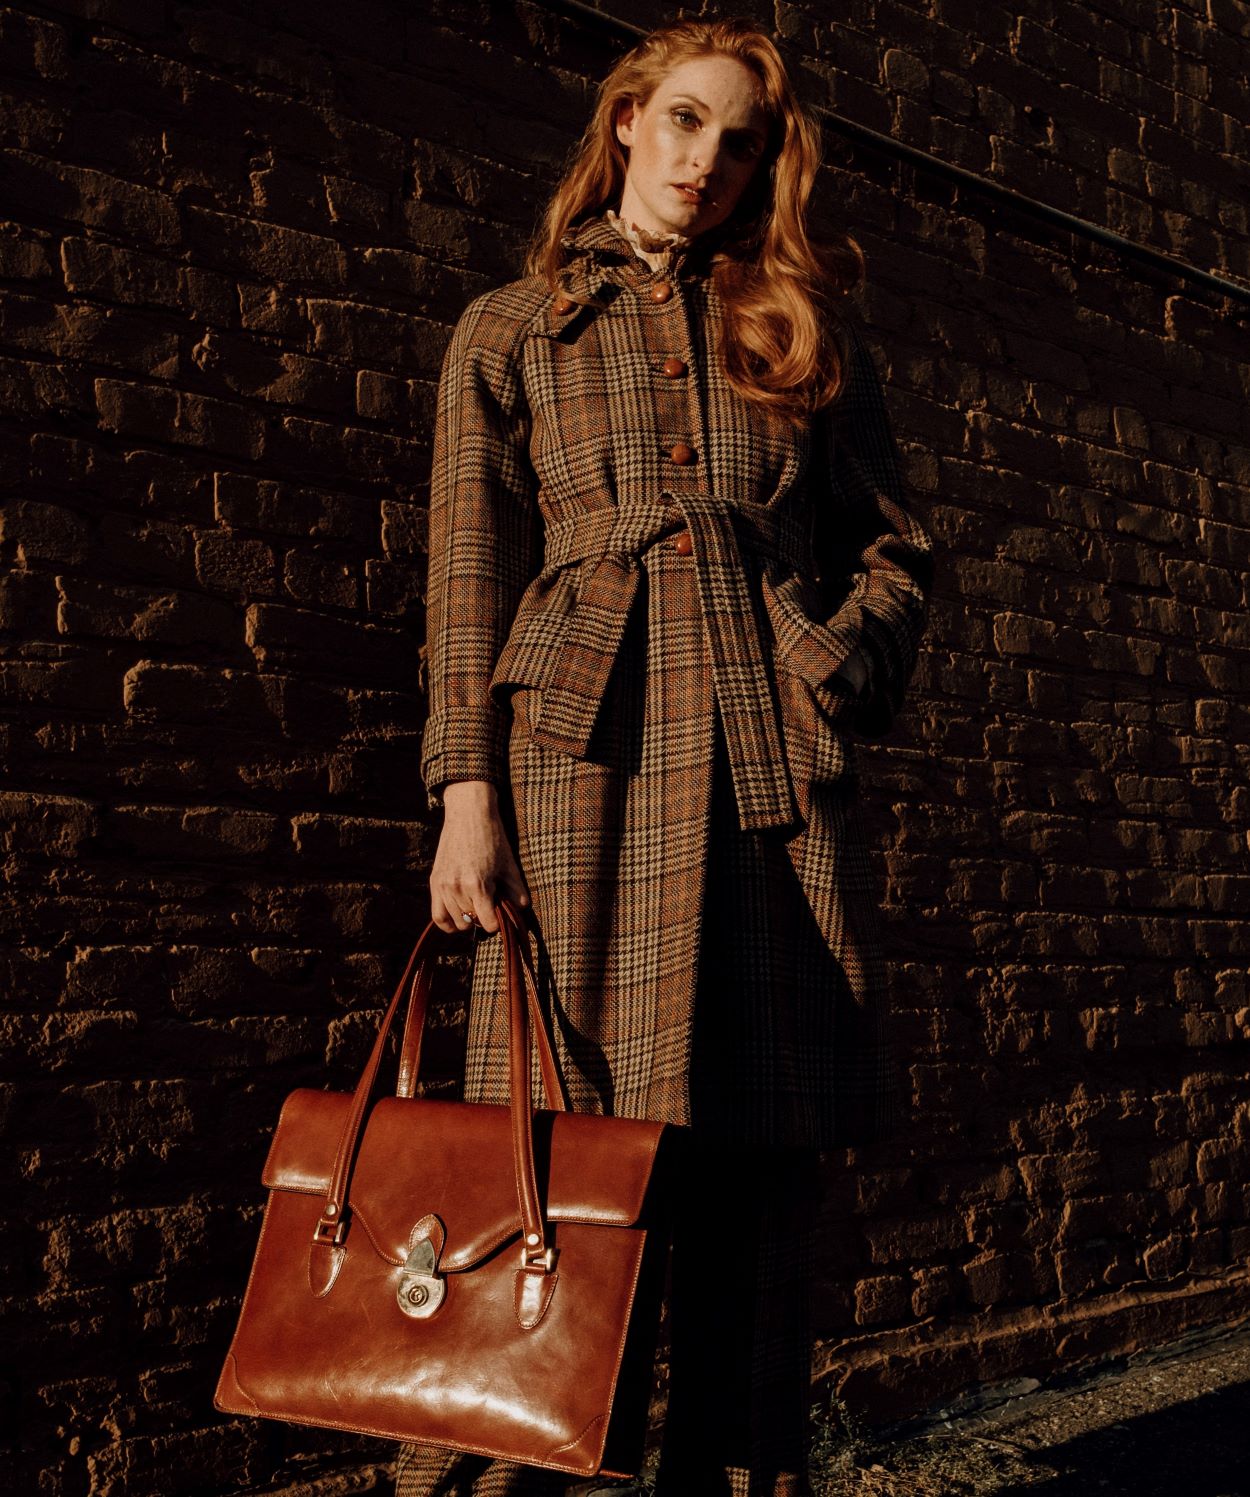 Burberry is renowned for its signature-style trench coats